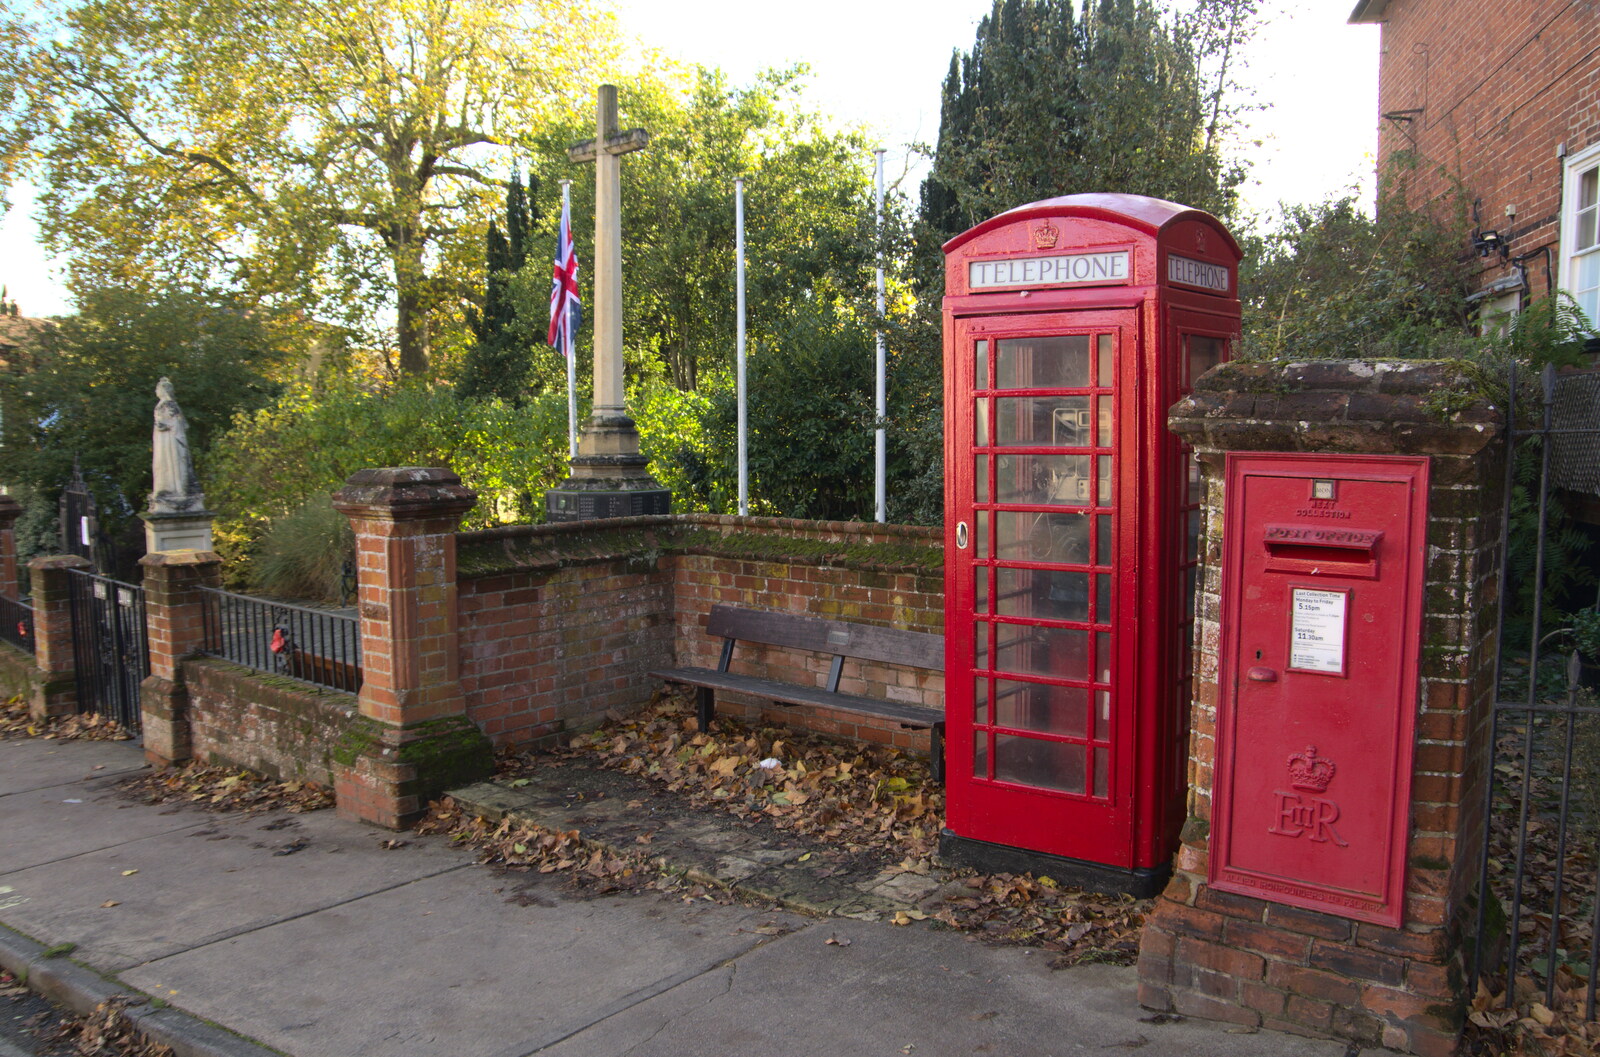 War Memorial, K6 phonebox and a red letterbox from Isobel's Birthday, Woodbridge, Suffolk - 2nd November 2020